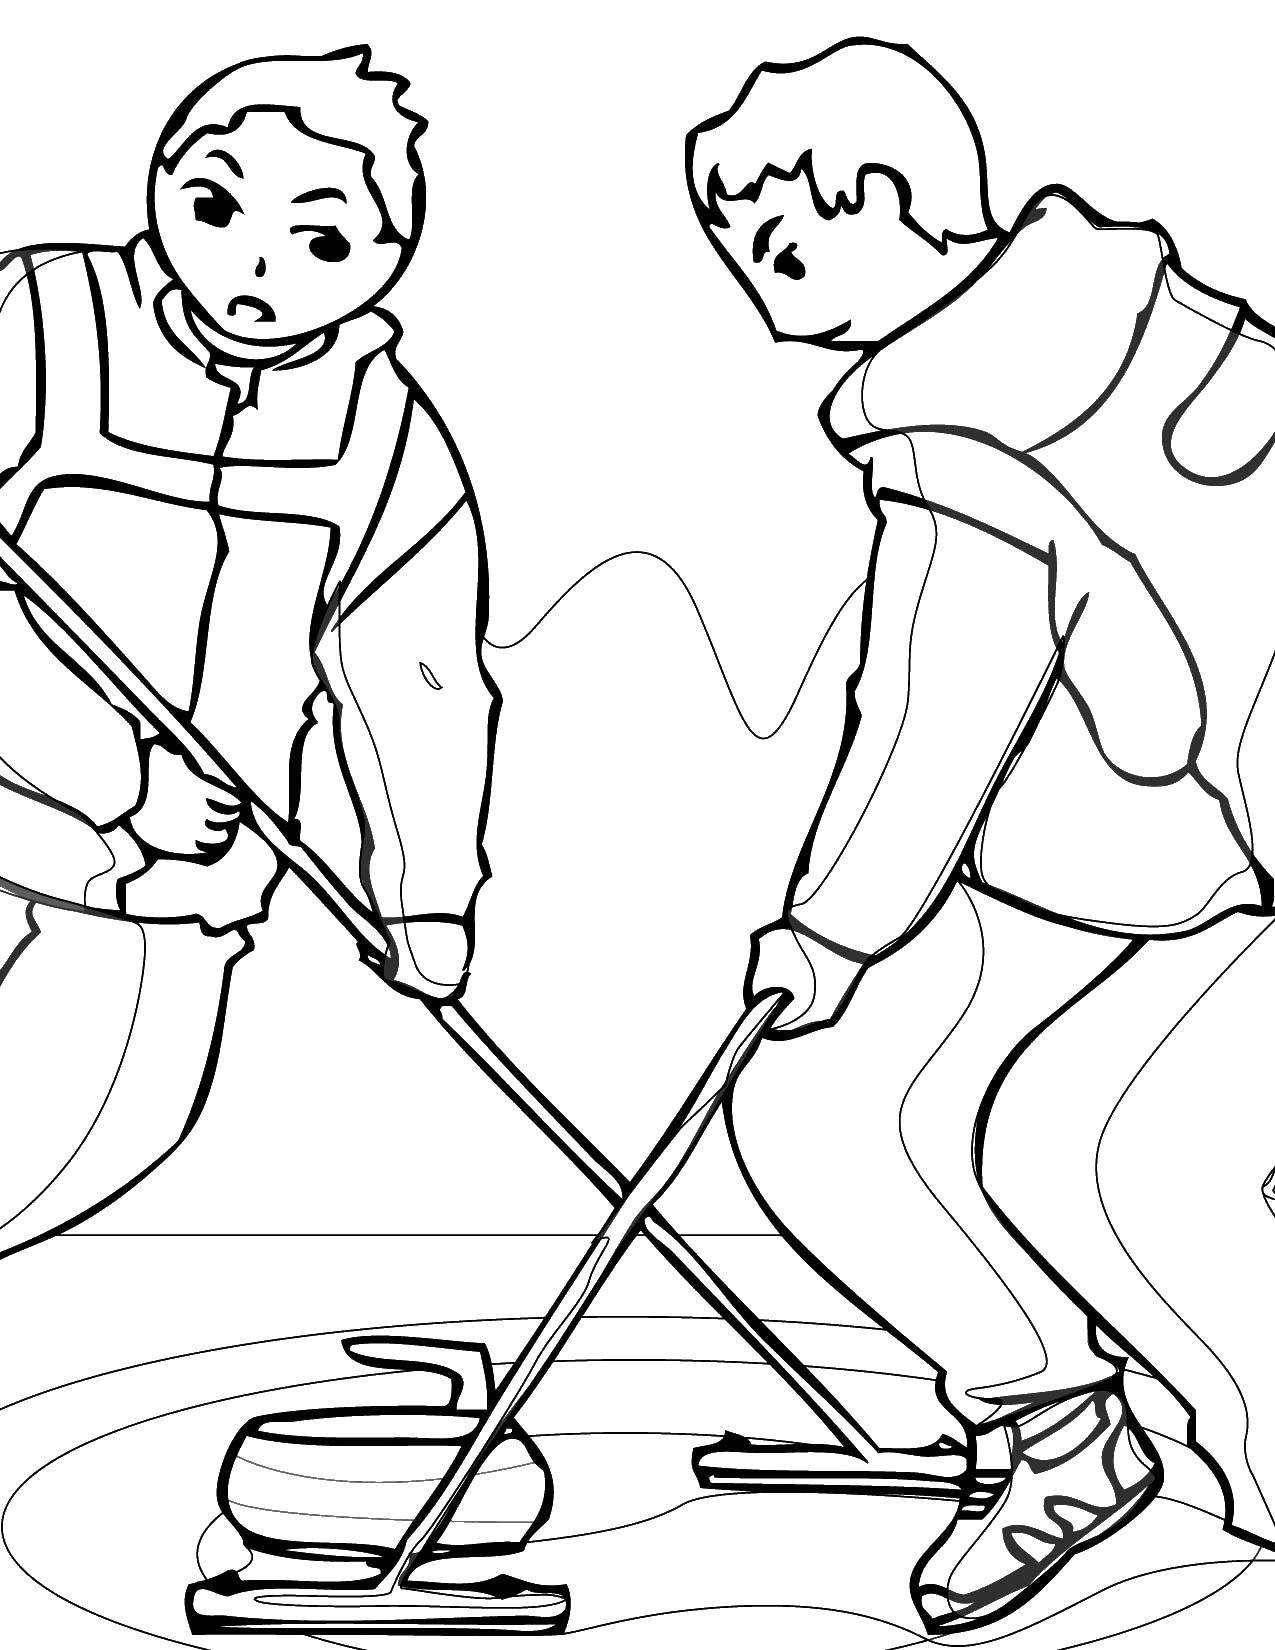 Coloring Curling. Category sports. Tags:  Curling.